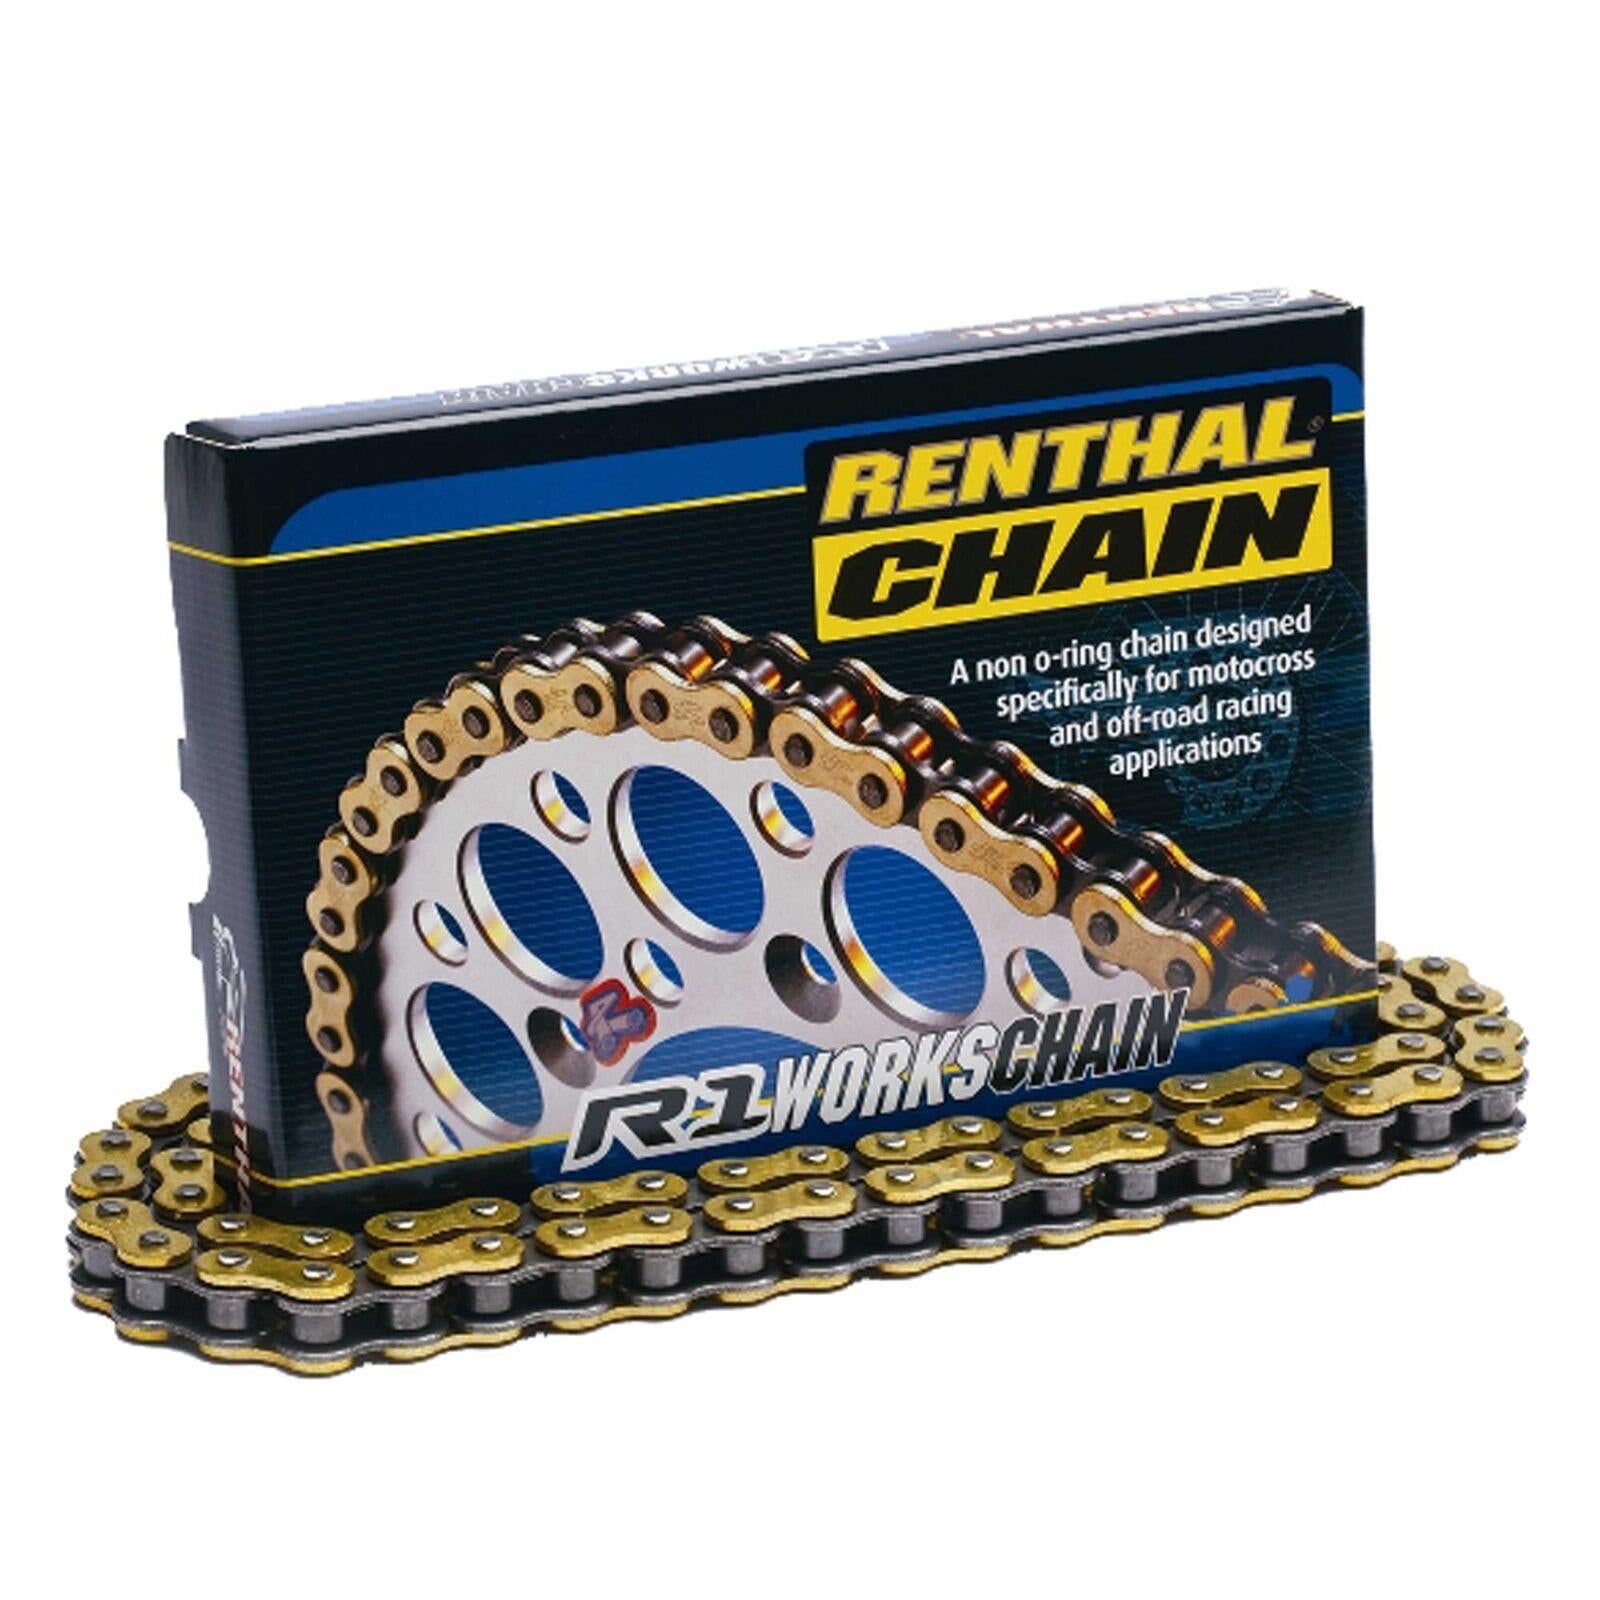 Renthal Works 415 R1 112L Chain MX Motorcycle Motocross Enduro Drive Chain New